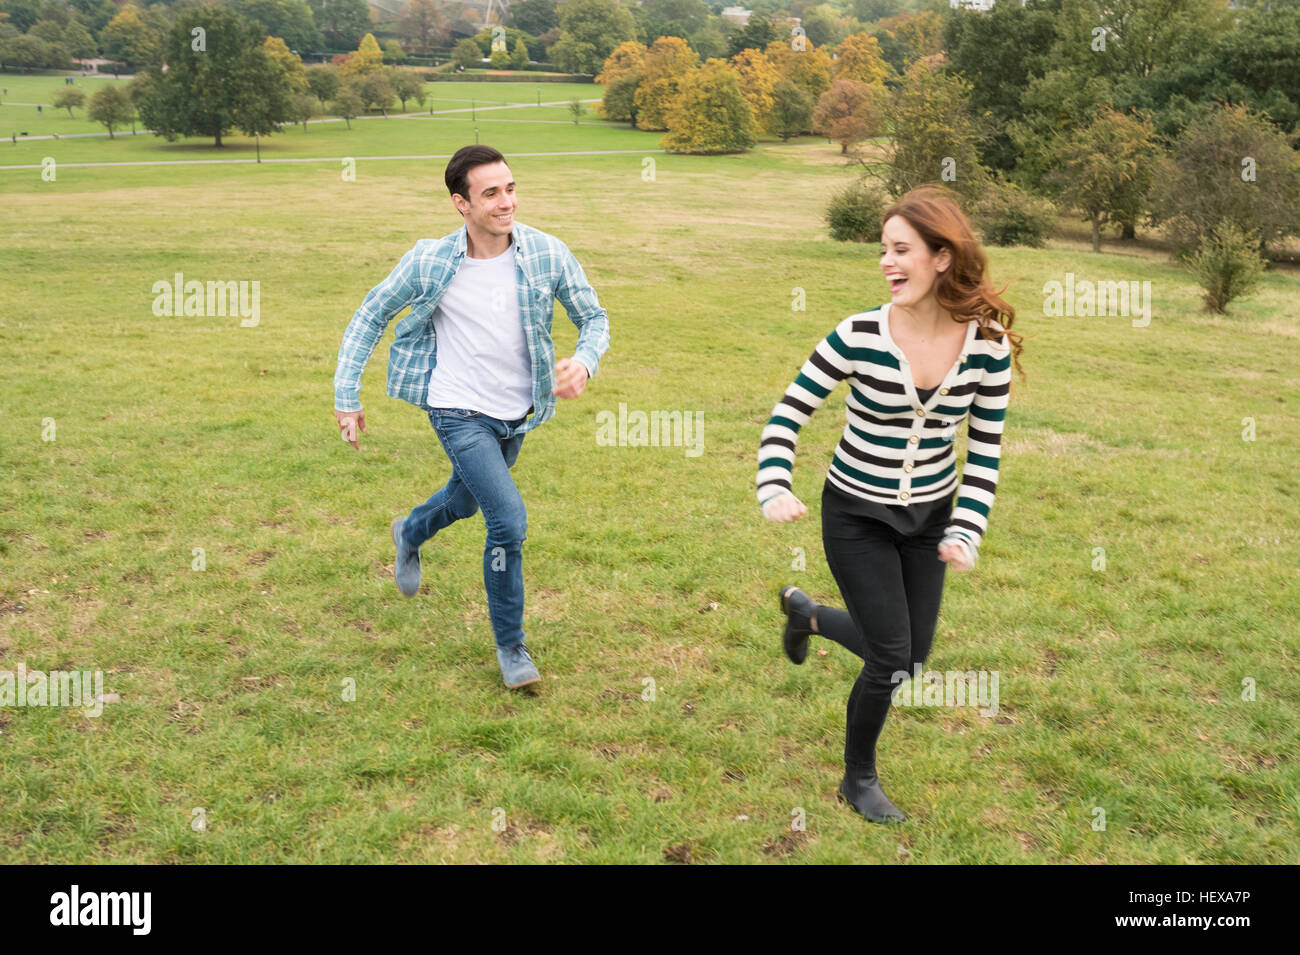 Couple running in field Banque D'Images